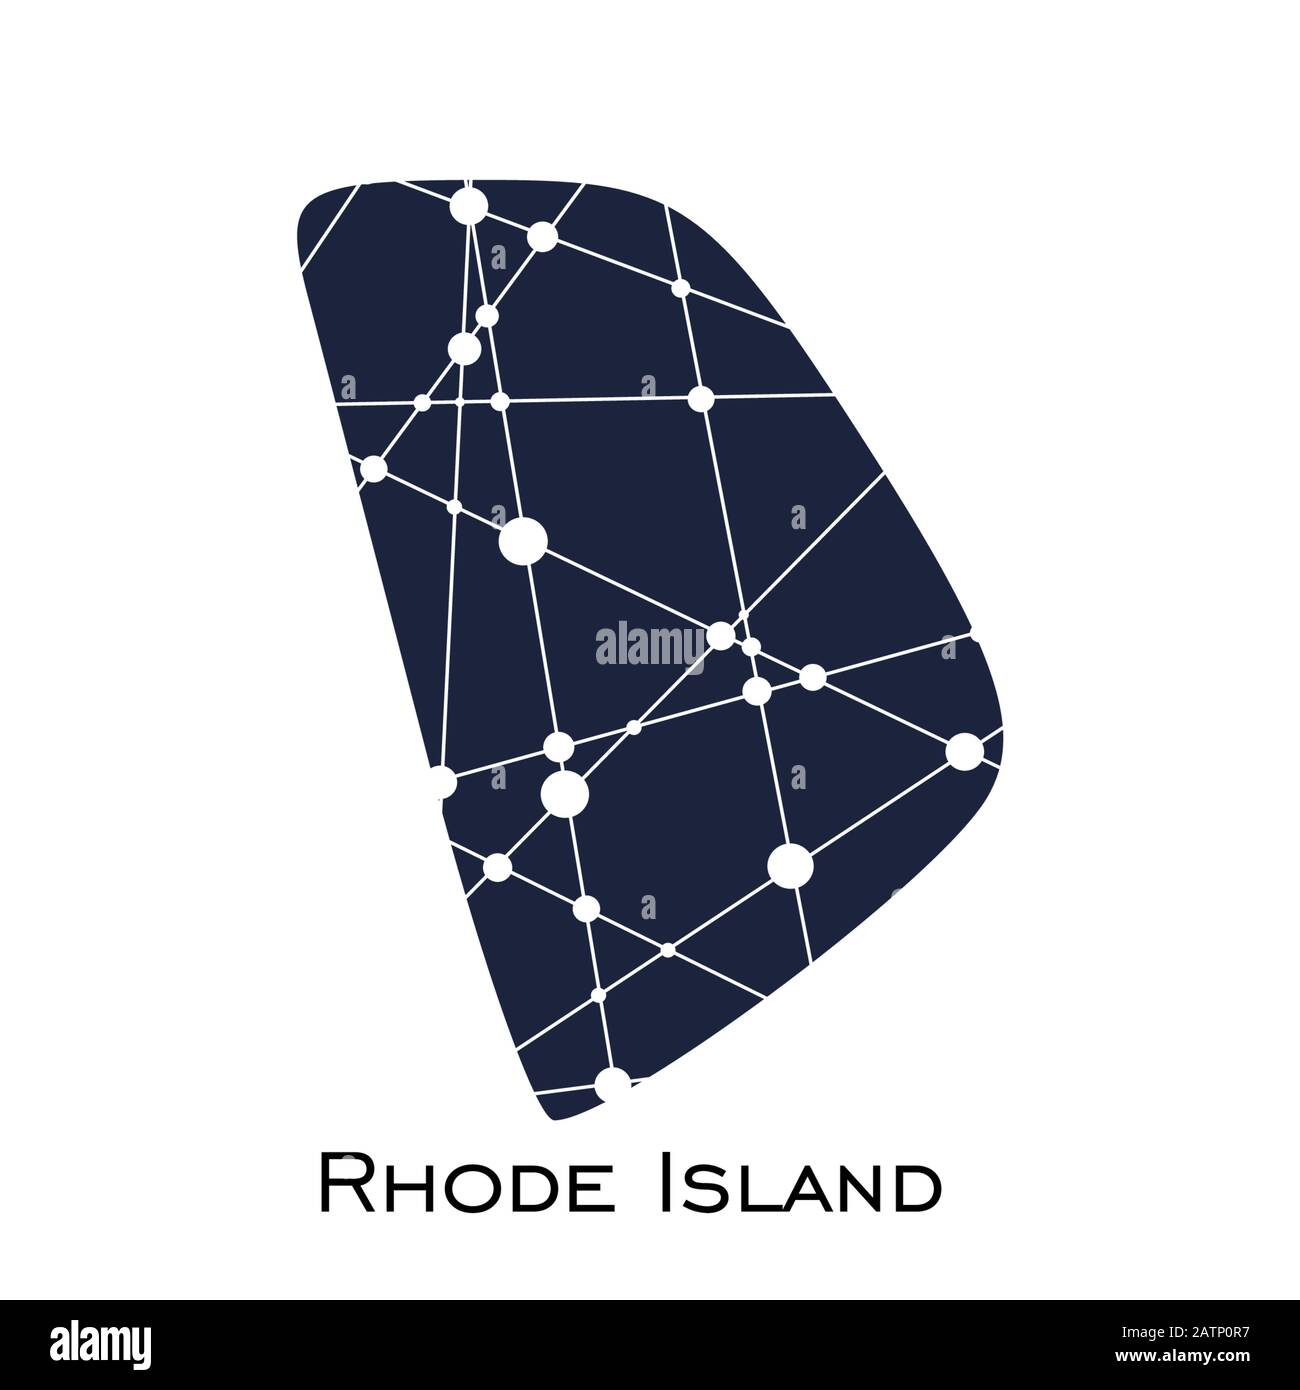 Rhode Island state map Stock Vector